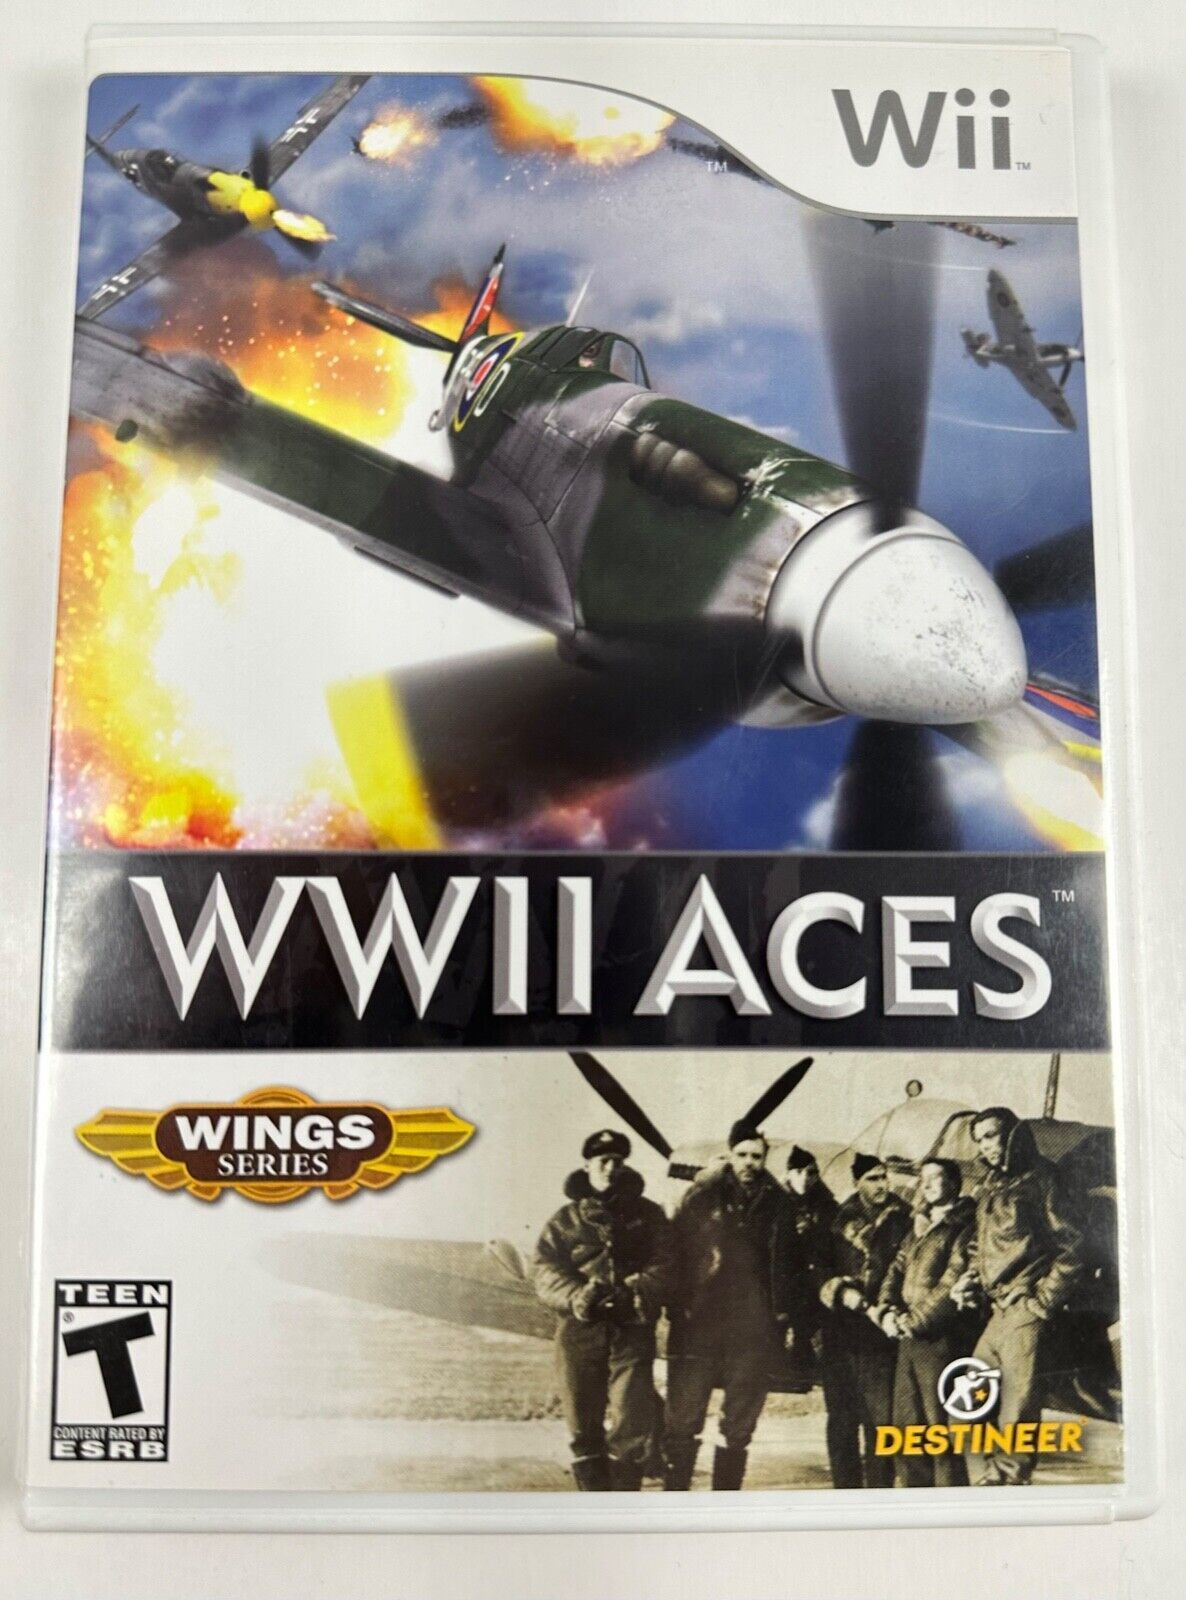 Primary image for WWII Aces Wings Series (Nintendo Wii, 2007) Video Game Complete, Very Good Cond.